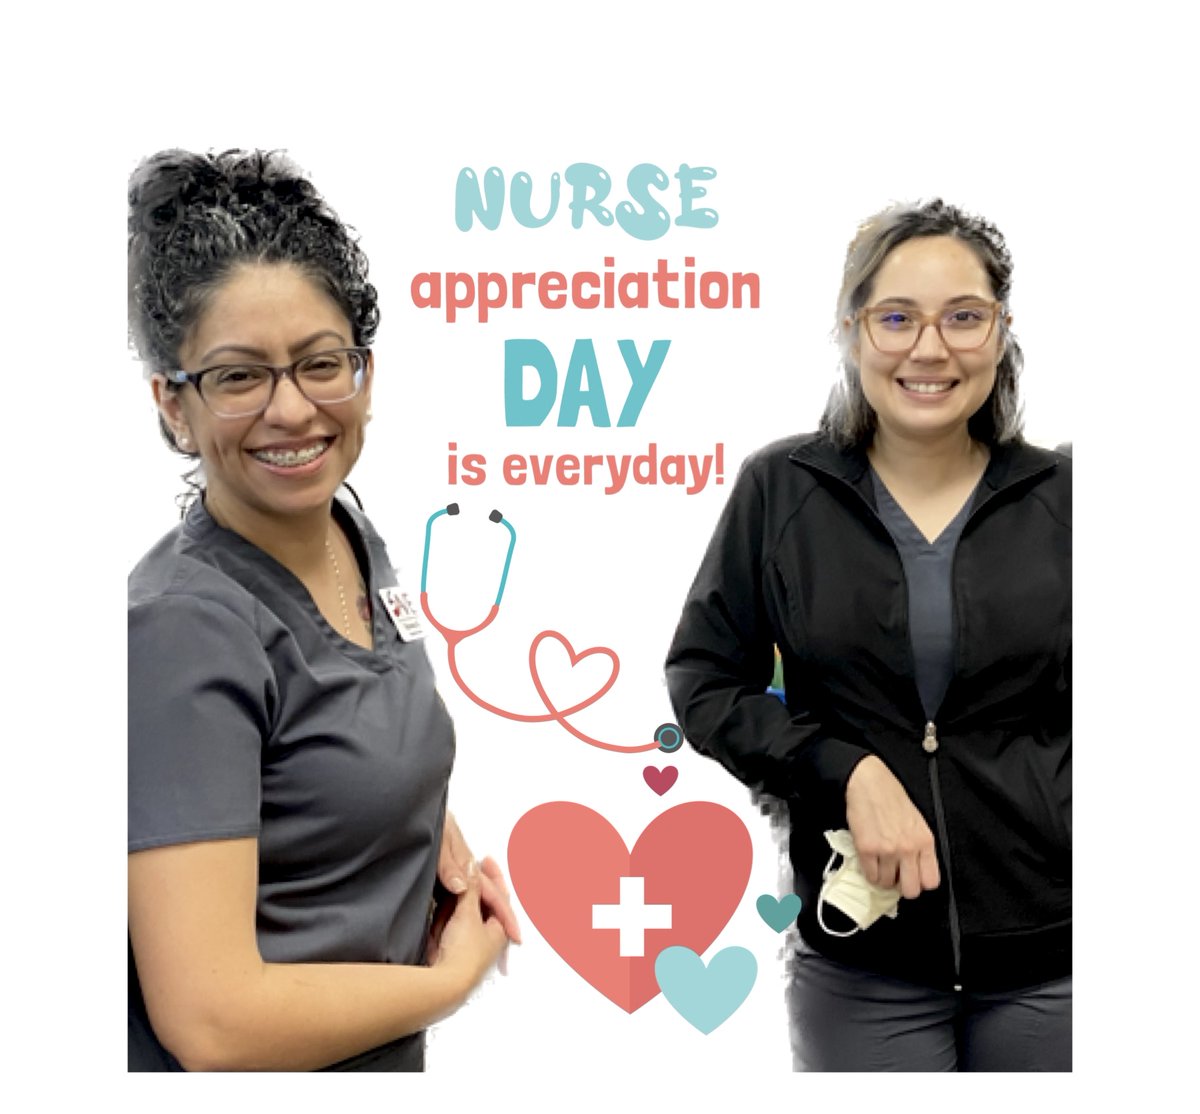 Happy National Nurses Week! 
Your kindness, compassion, and optimism for our patients health does not go unnoticed. We appreciate you everyday ❤️
#SAVElimbsSAVElives 
#togetherwecanmakeadifference